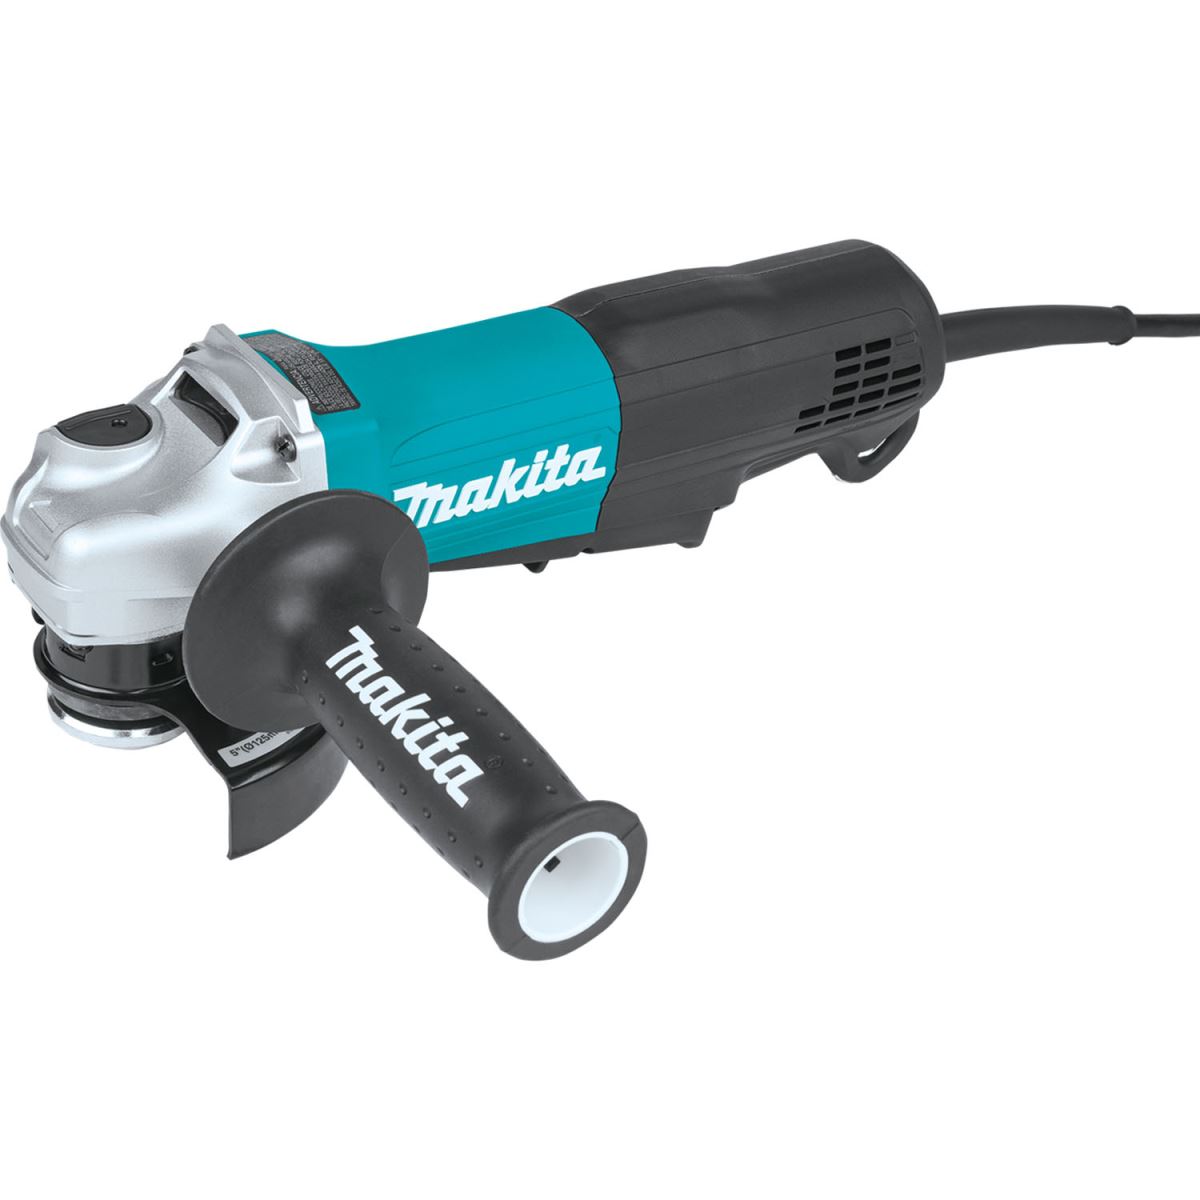 4-1/2 IN. / 5 IN. PADDLE SWITCH ANGLE GRINDER WITH AC/DC SWITCH